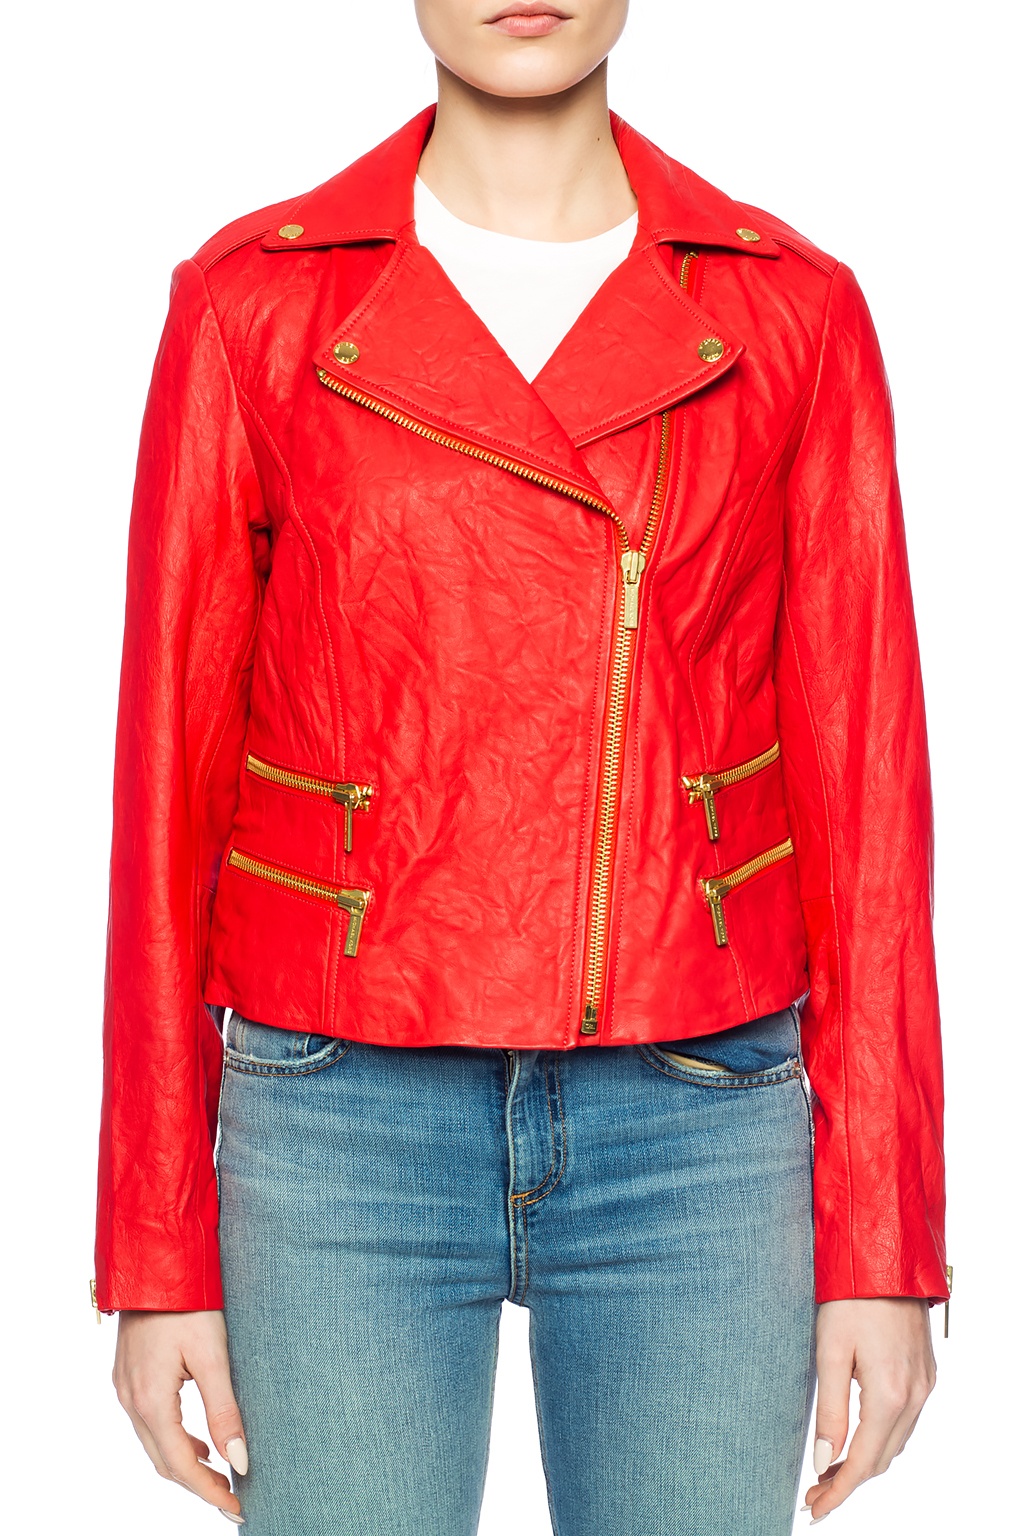 michael kors red leather jacket